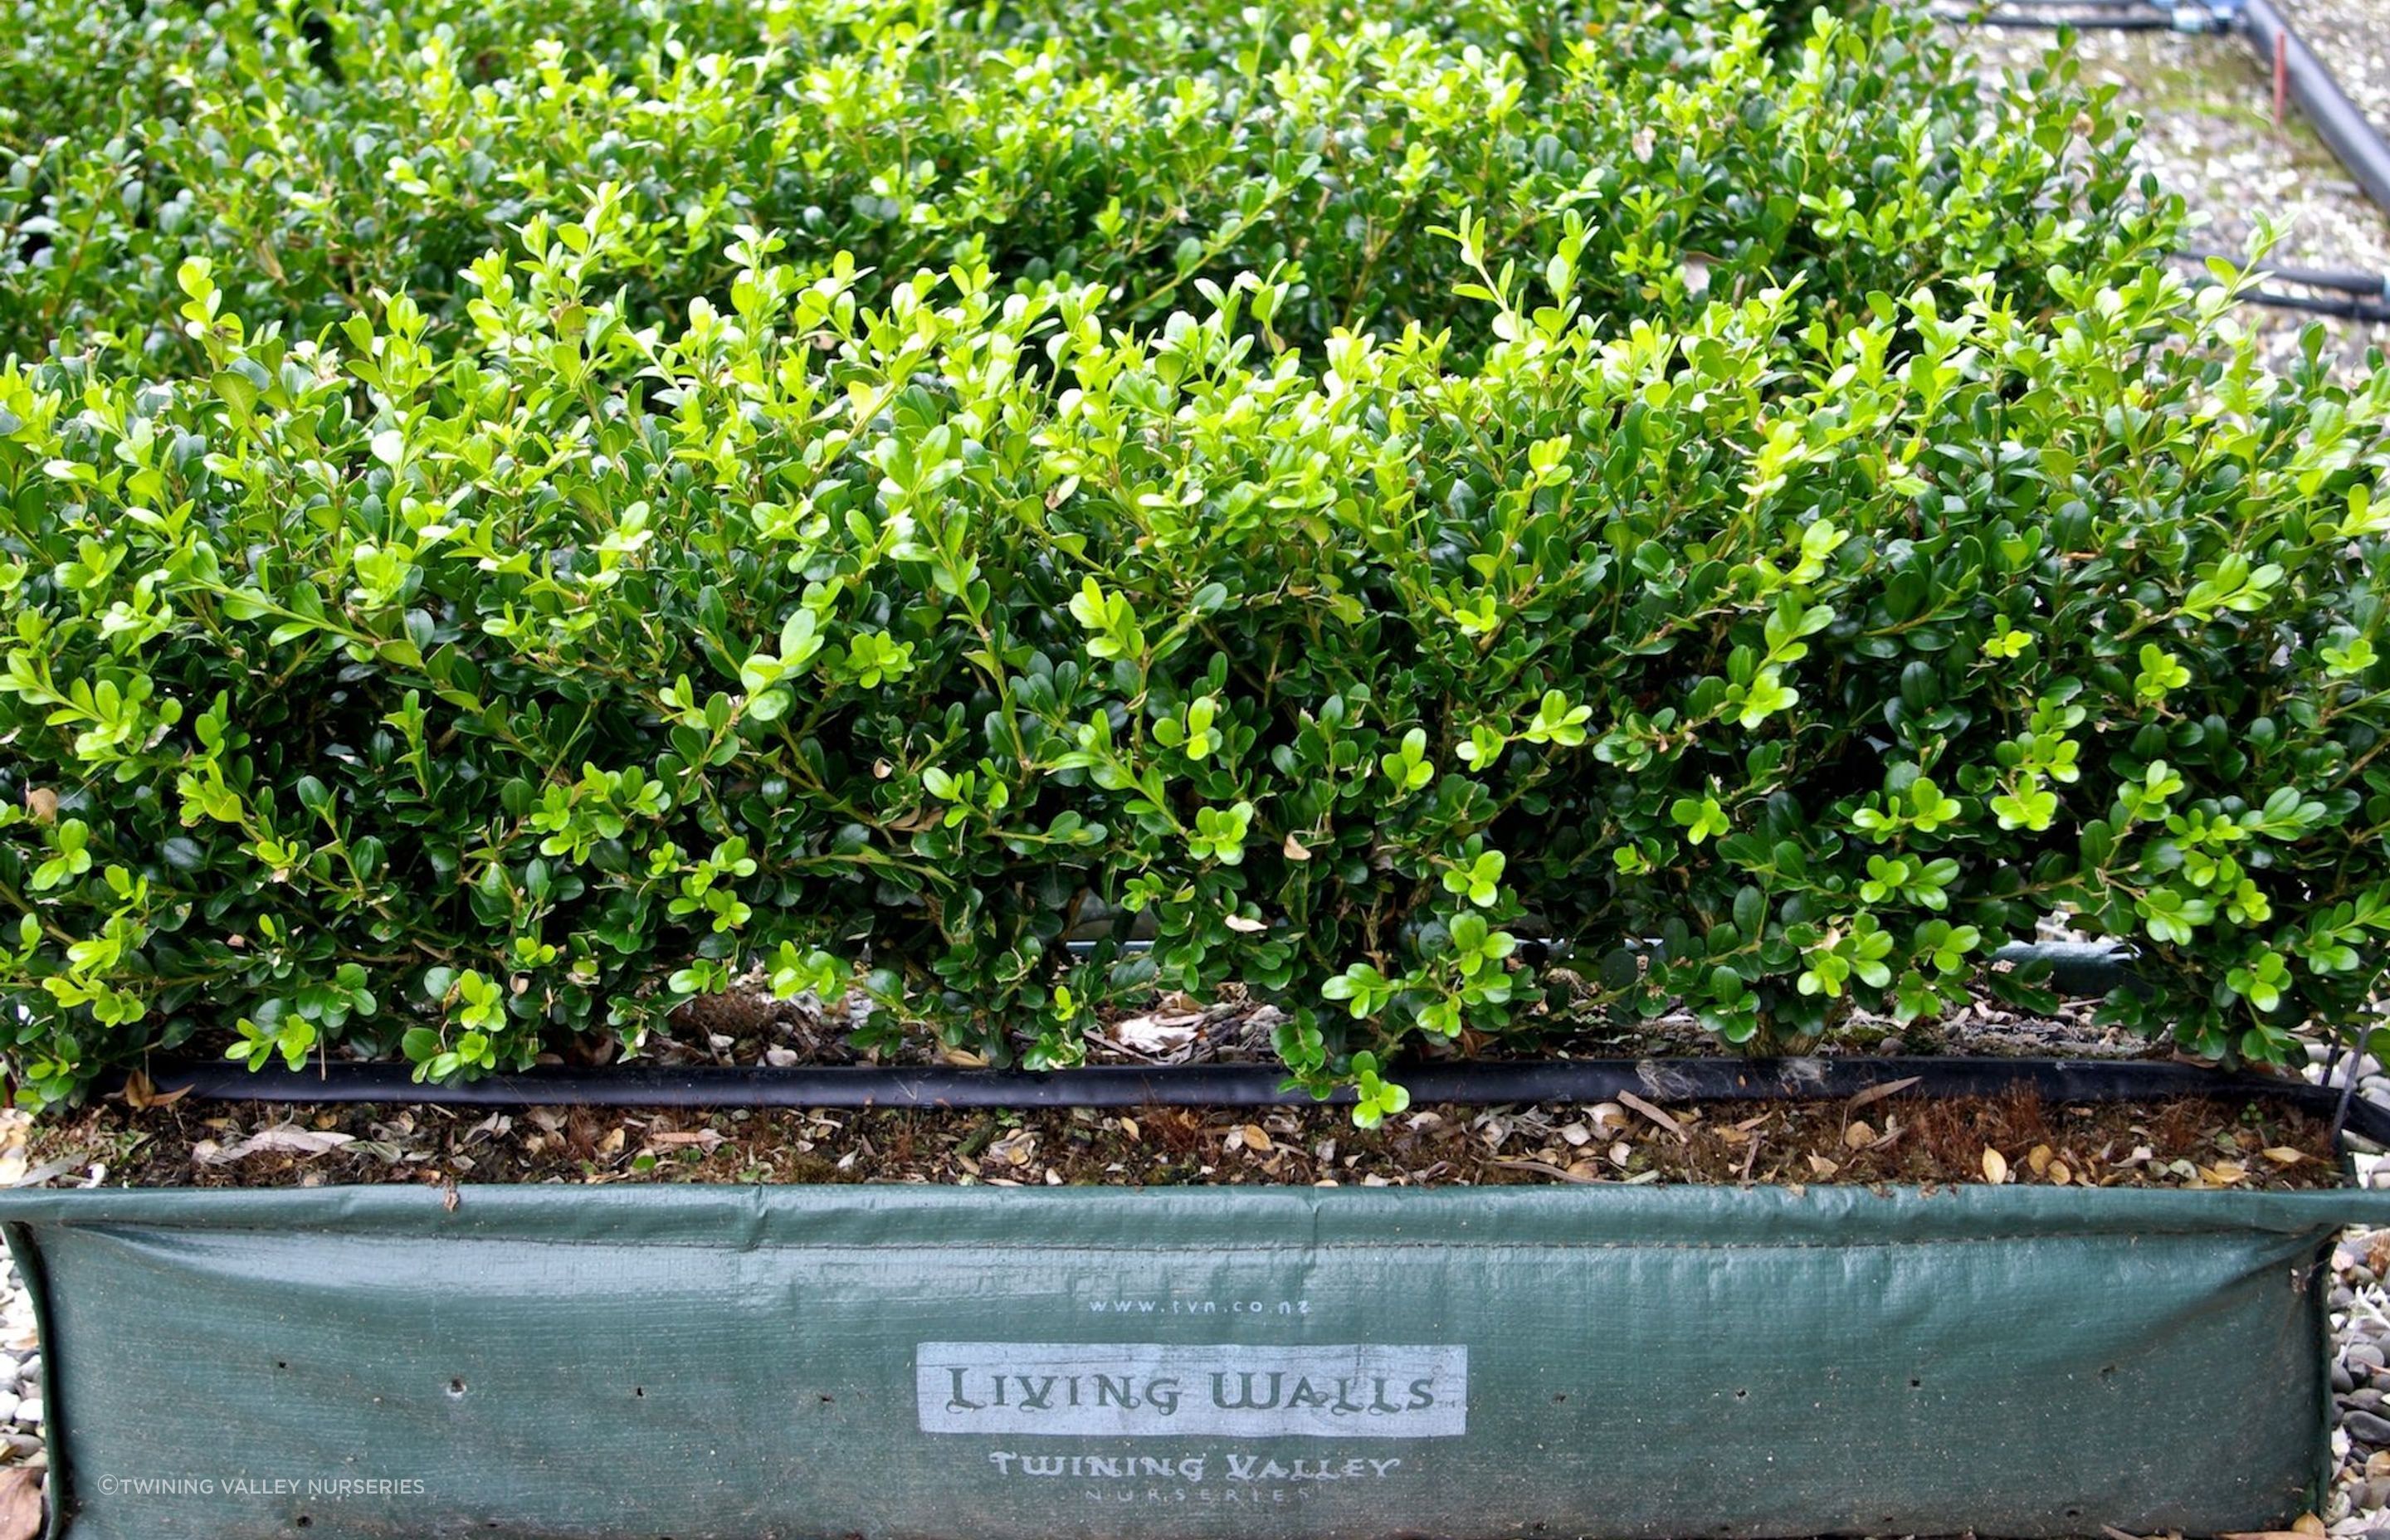 This Buxus hybrid 'Green Gem' is a great choice for a traditional low box hedge.